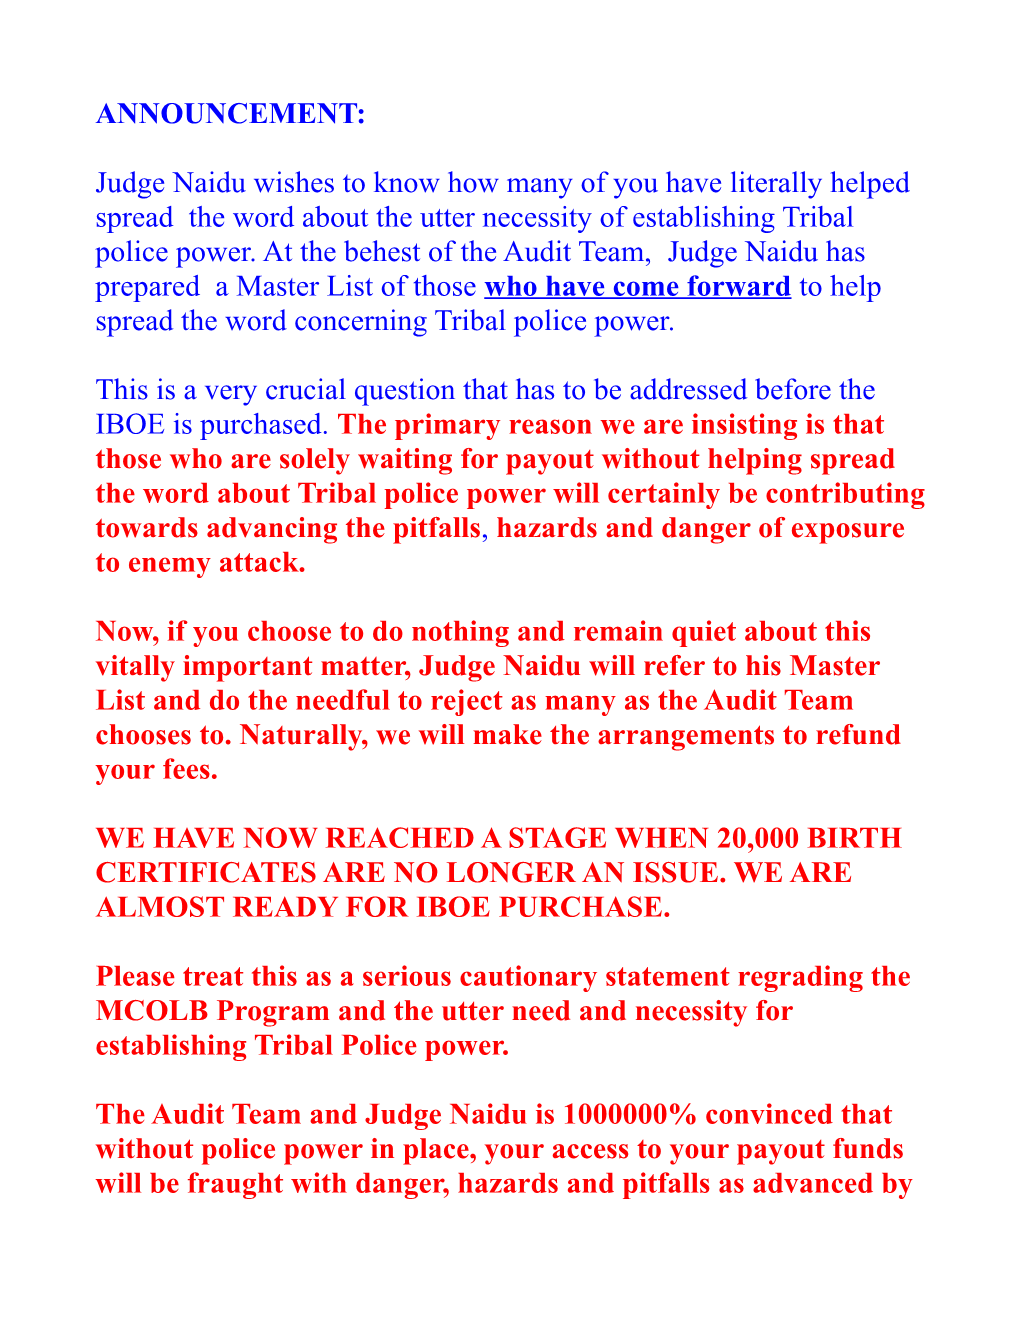 Judge Naidu Wishes to Know How Many of You Have Literally Helped Spread the Word About